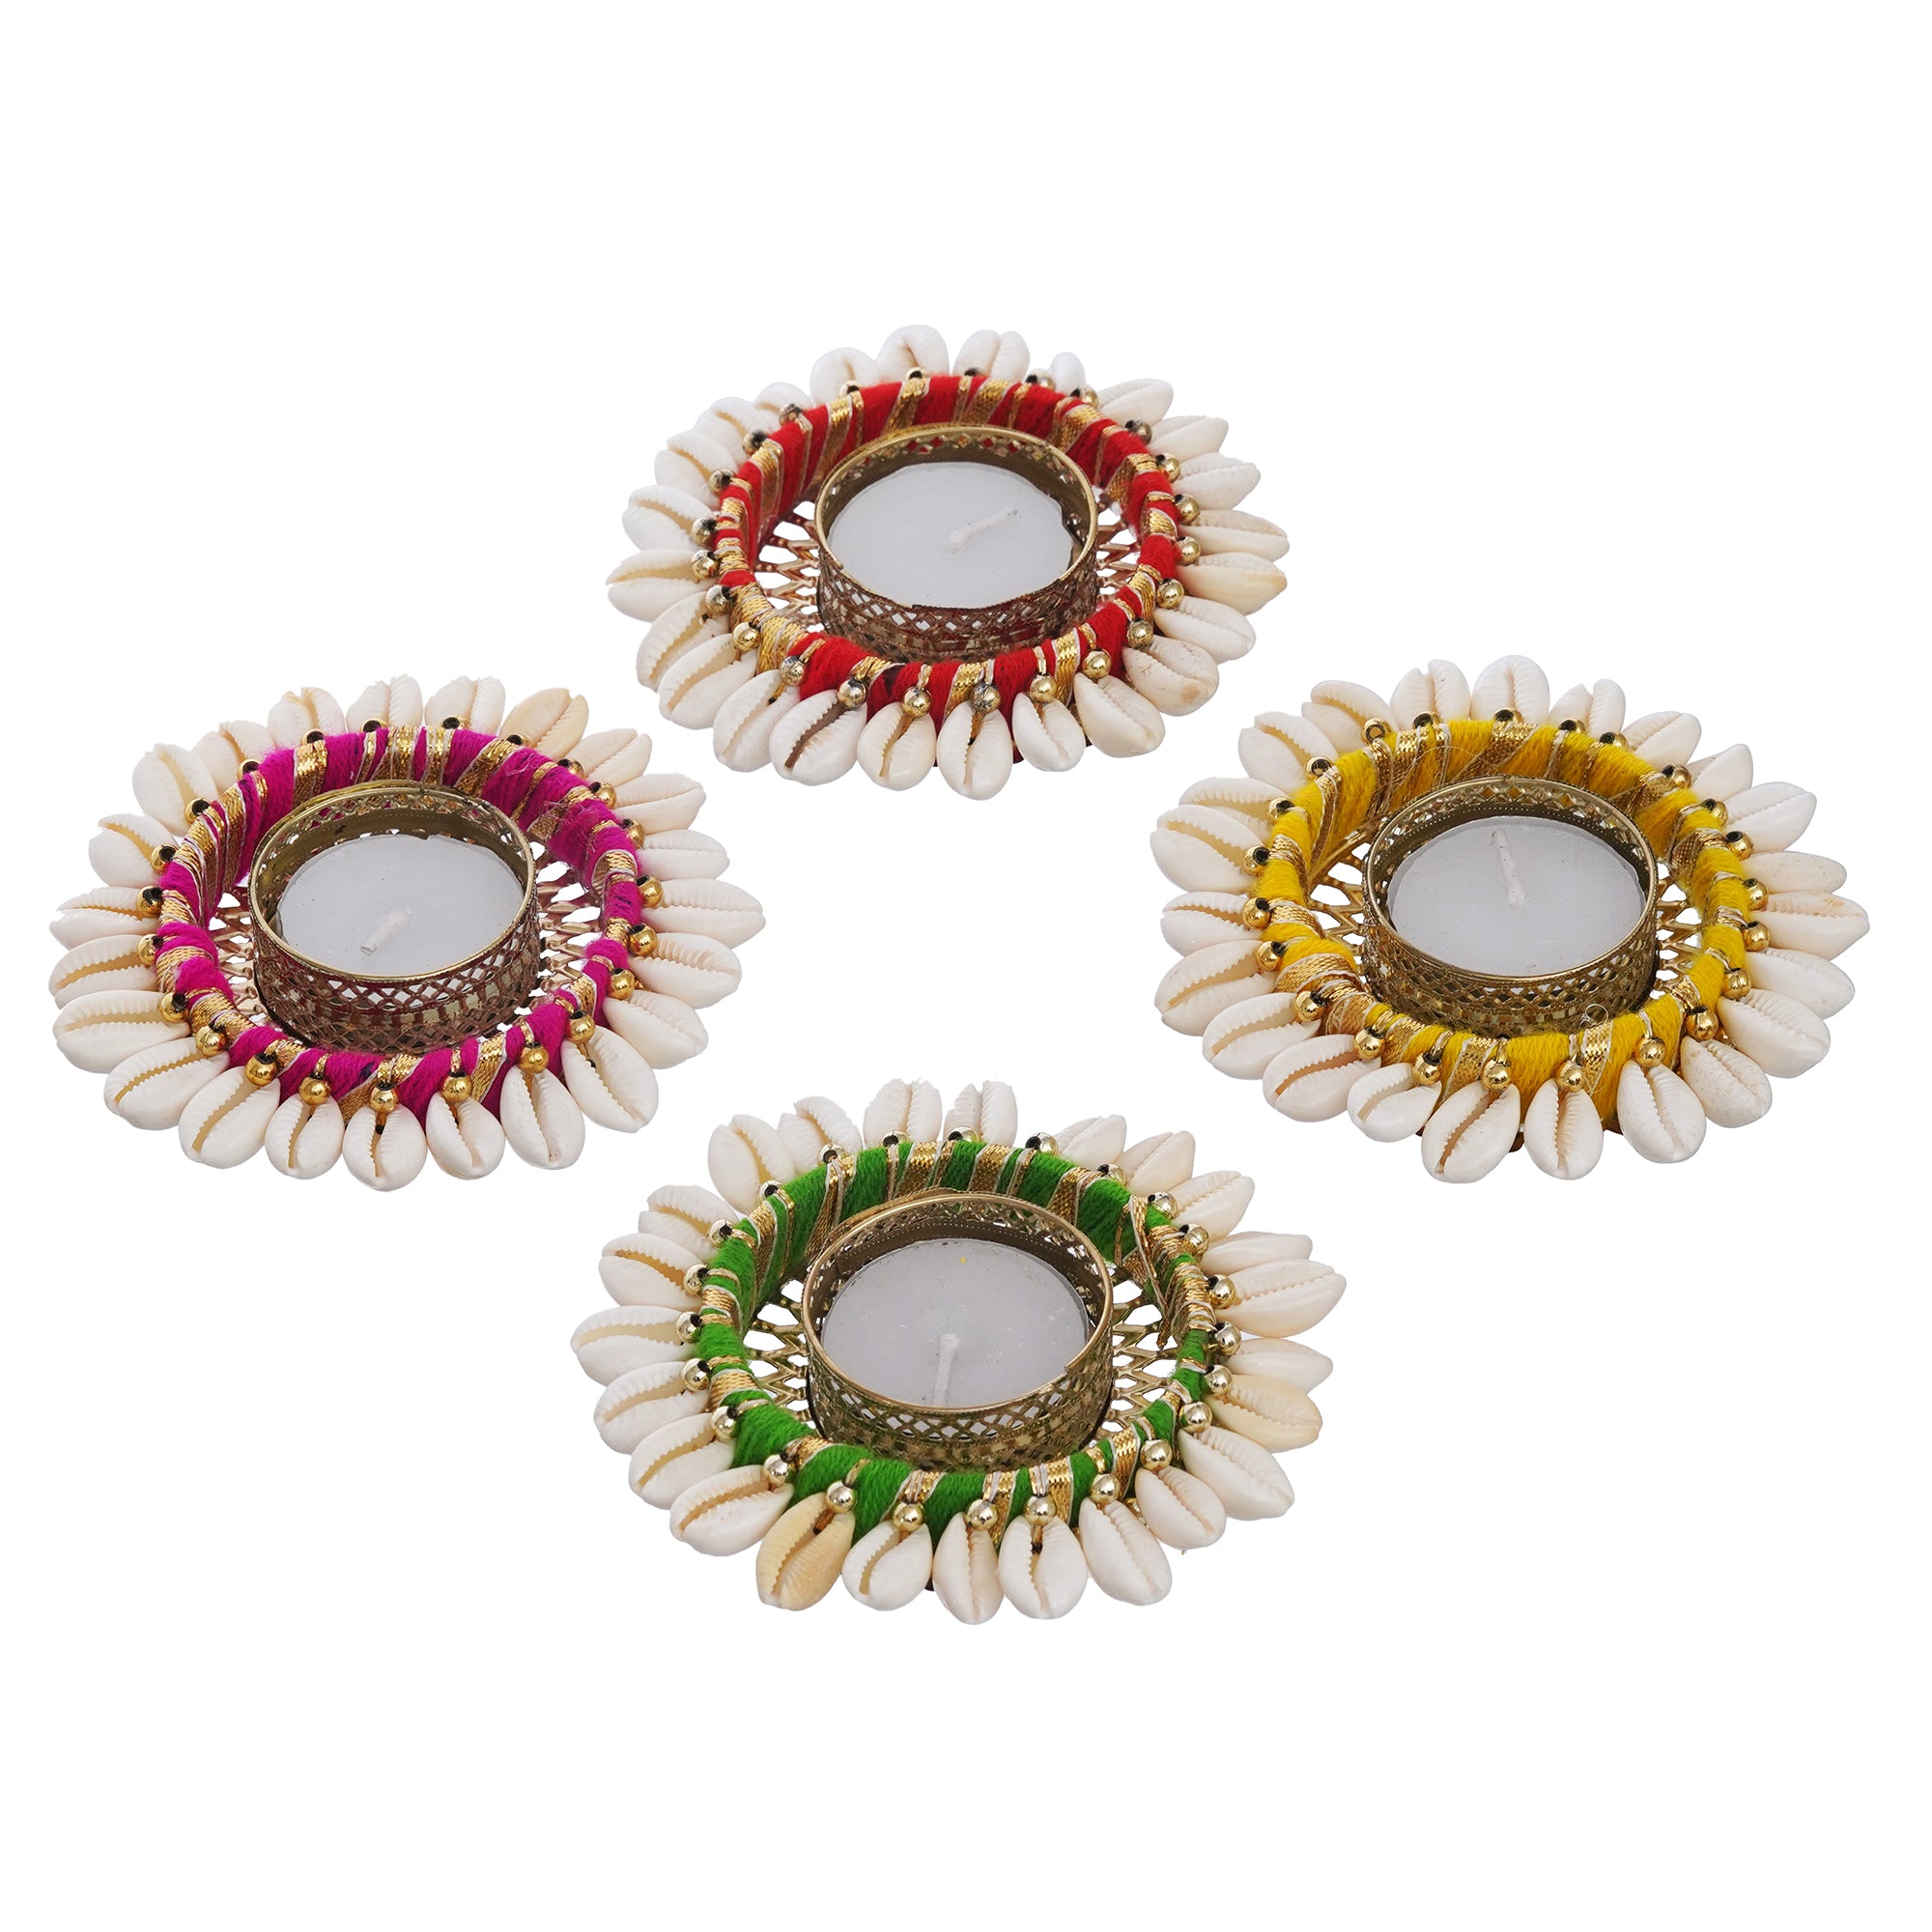 eCraftIndia Multicolor and White Cowrie Shell Decorative Metal Tea Light Holders (Set of 4) 6